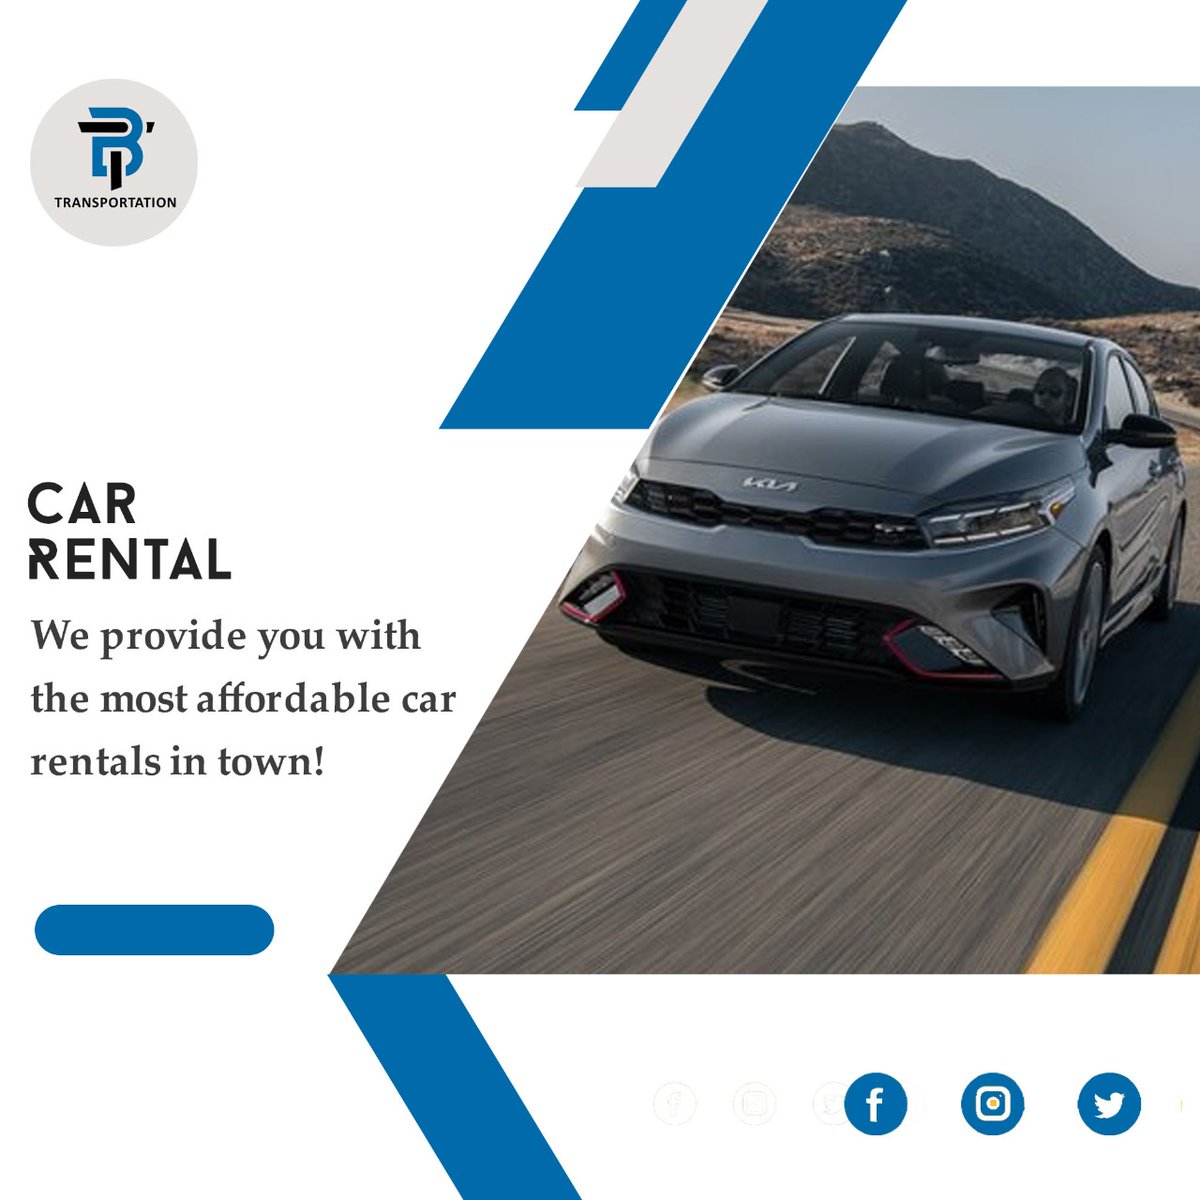 Make the most of your trip because we offer you rental cars at the most affordable prices in town!

Call Us Now: +1 (267) 370-7645
#BowenTransportation #transport #rentalservice #affordable #town #trip #car #provide #prices #thursdaymotivation